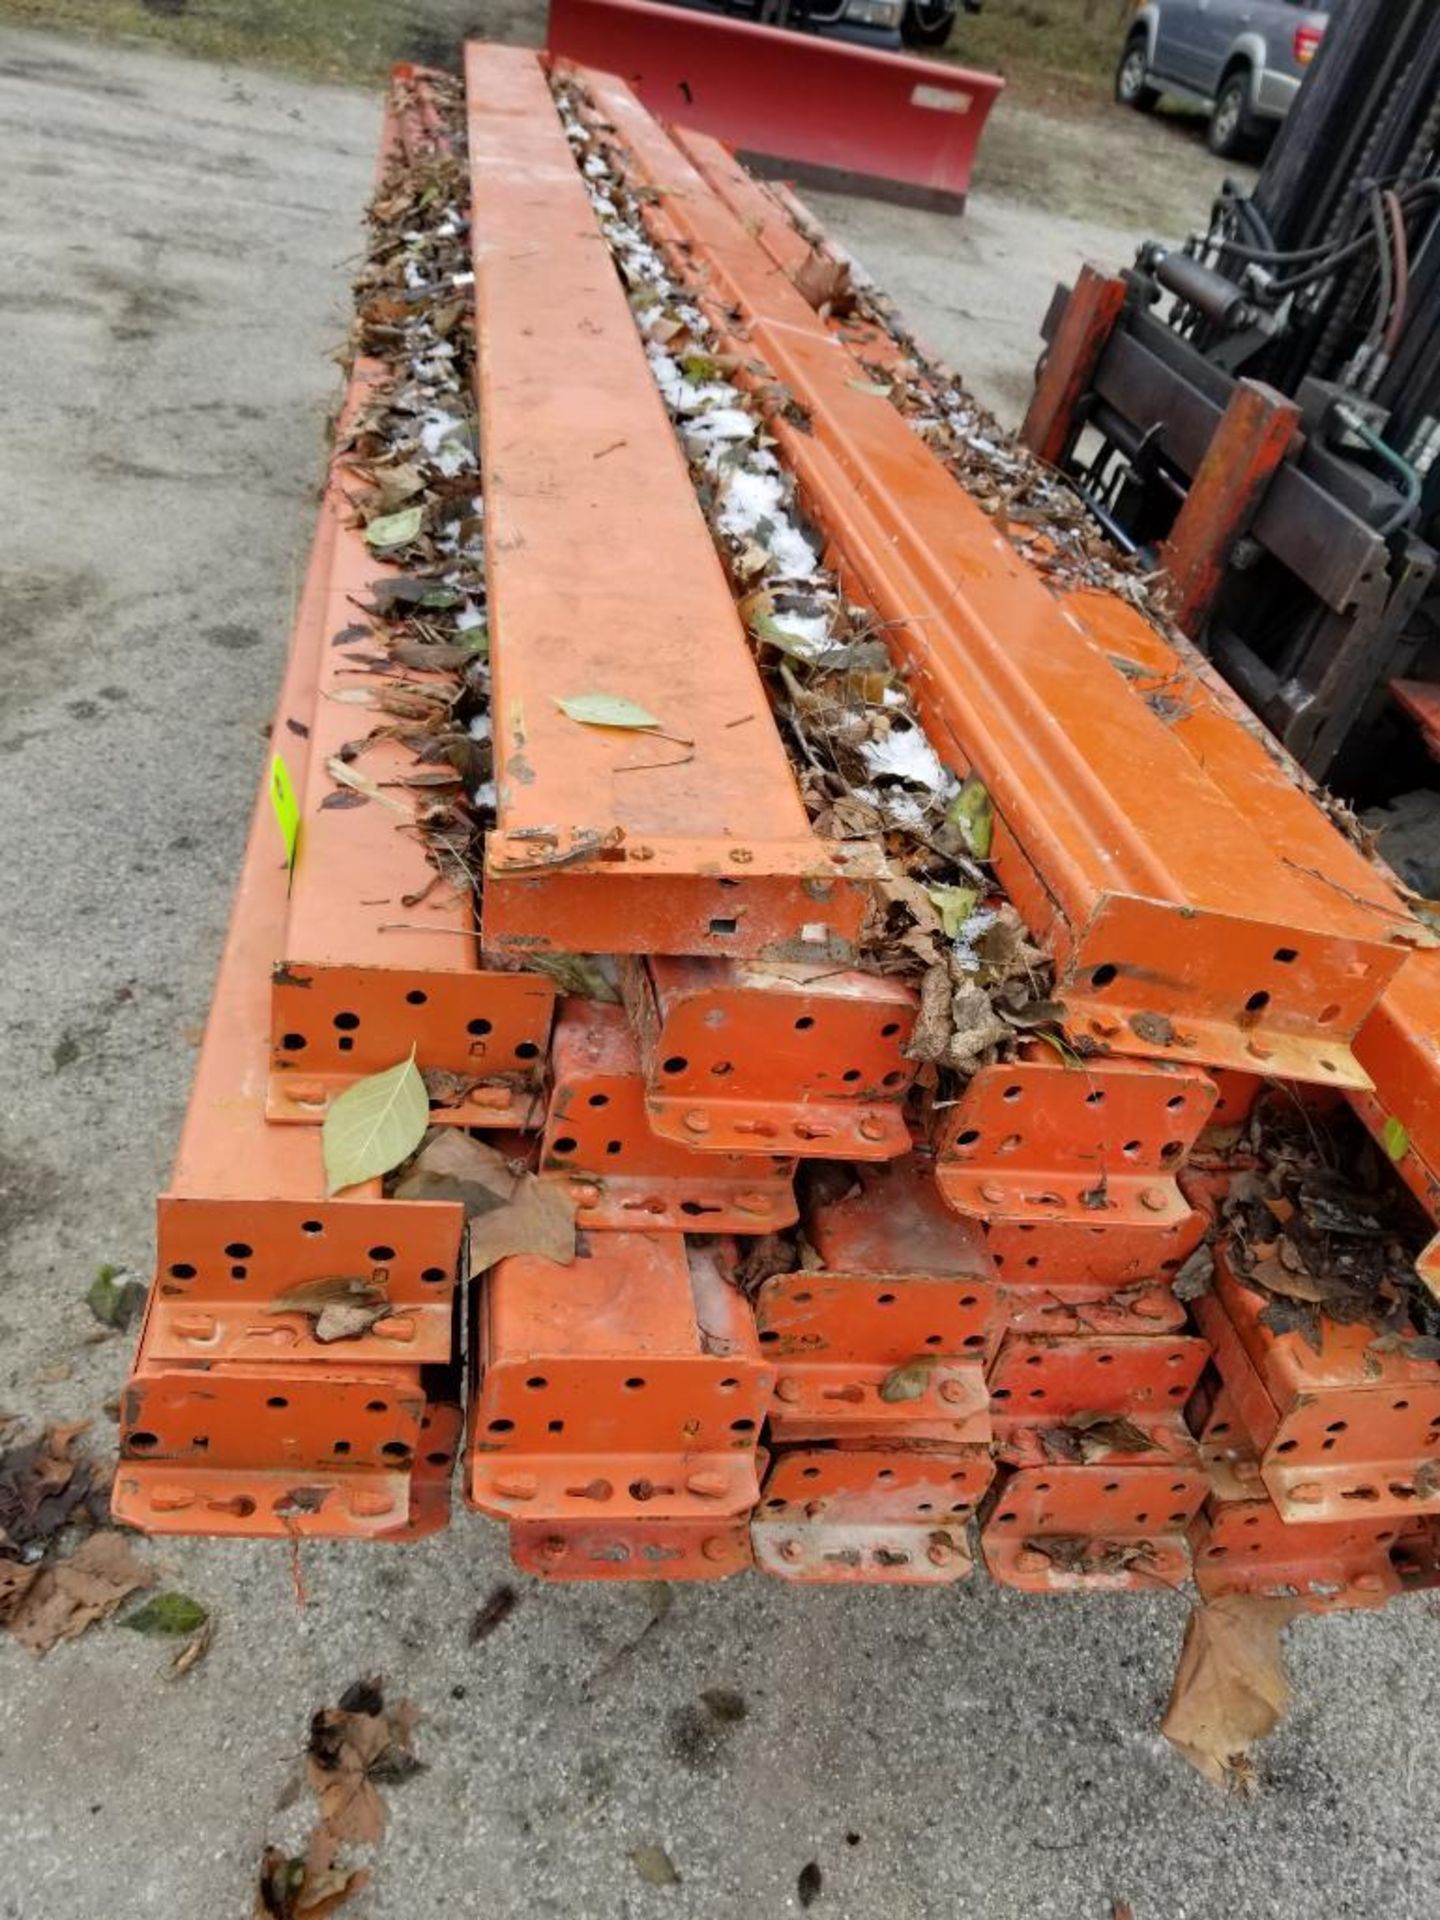 Qty 16 - Pallet racking cross bars. 144in long. - Image 3 of 4